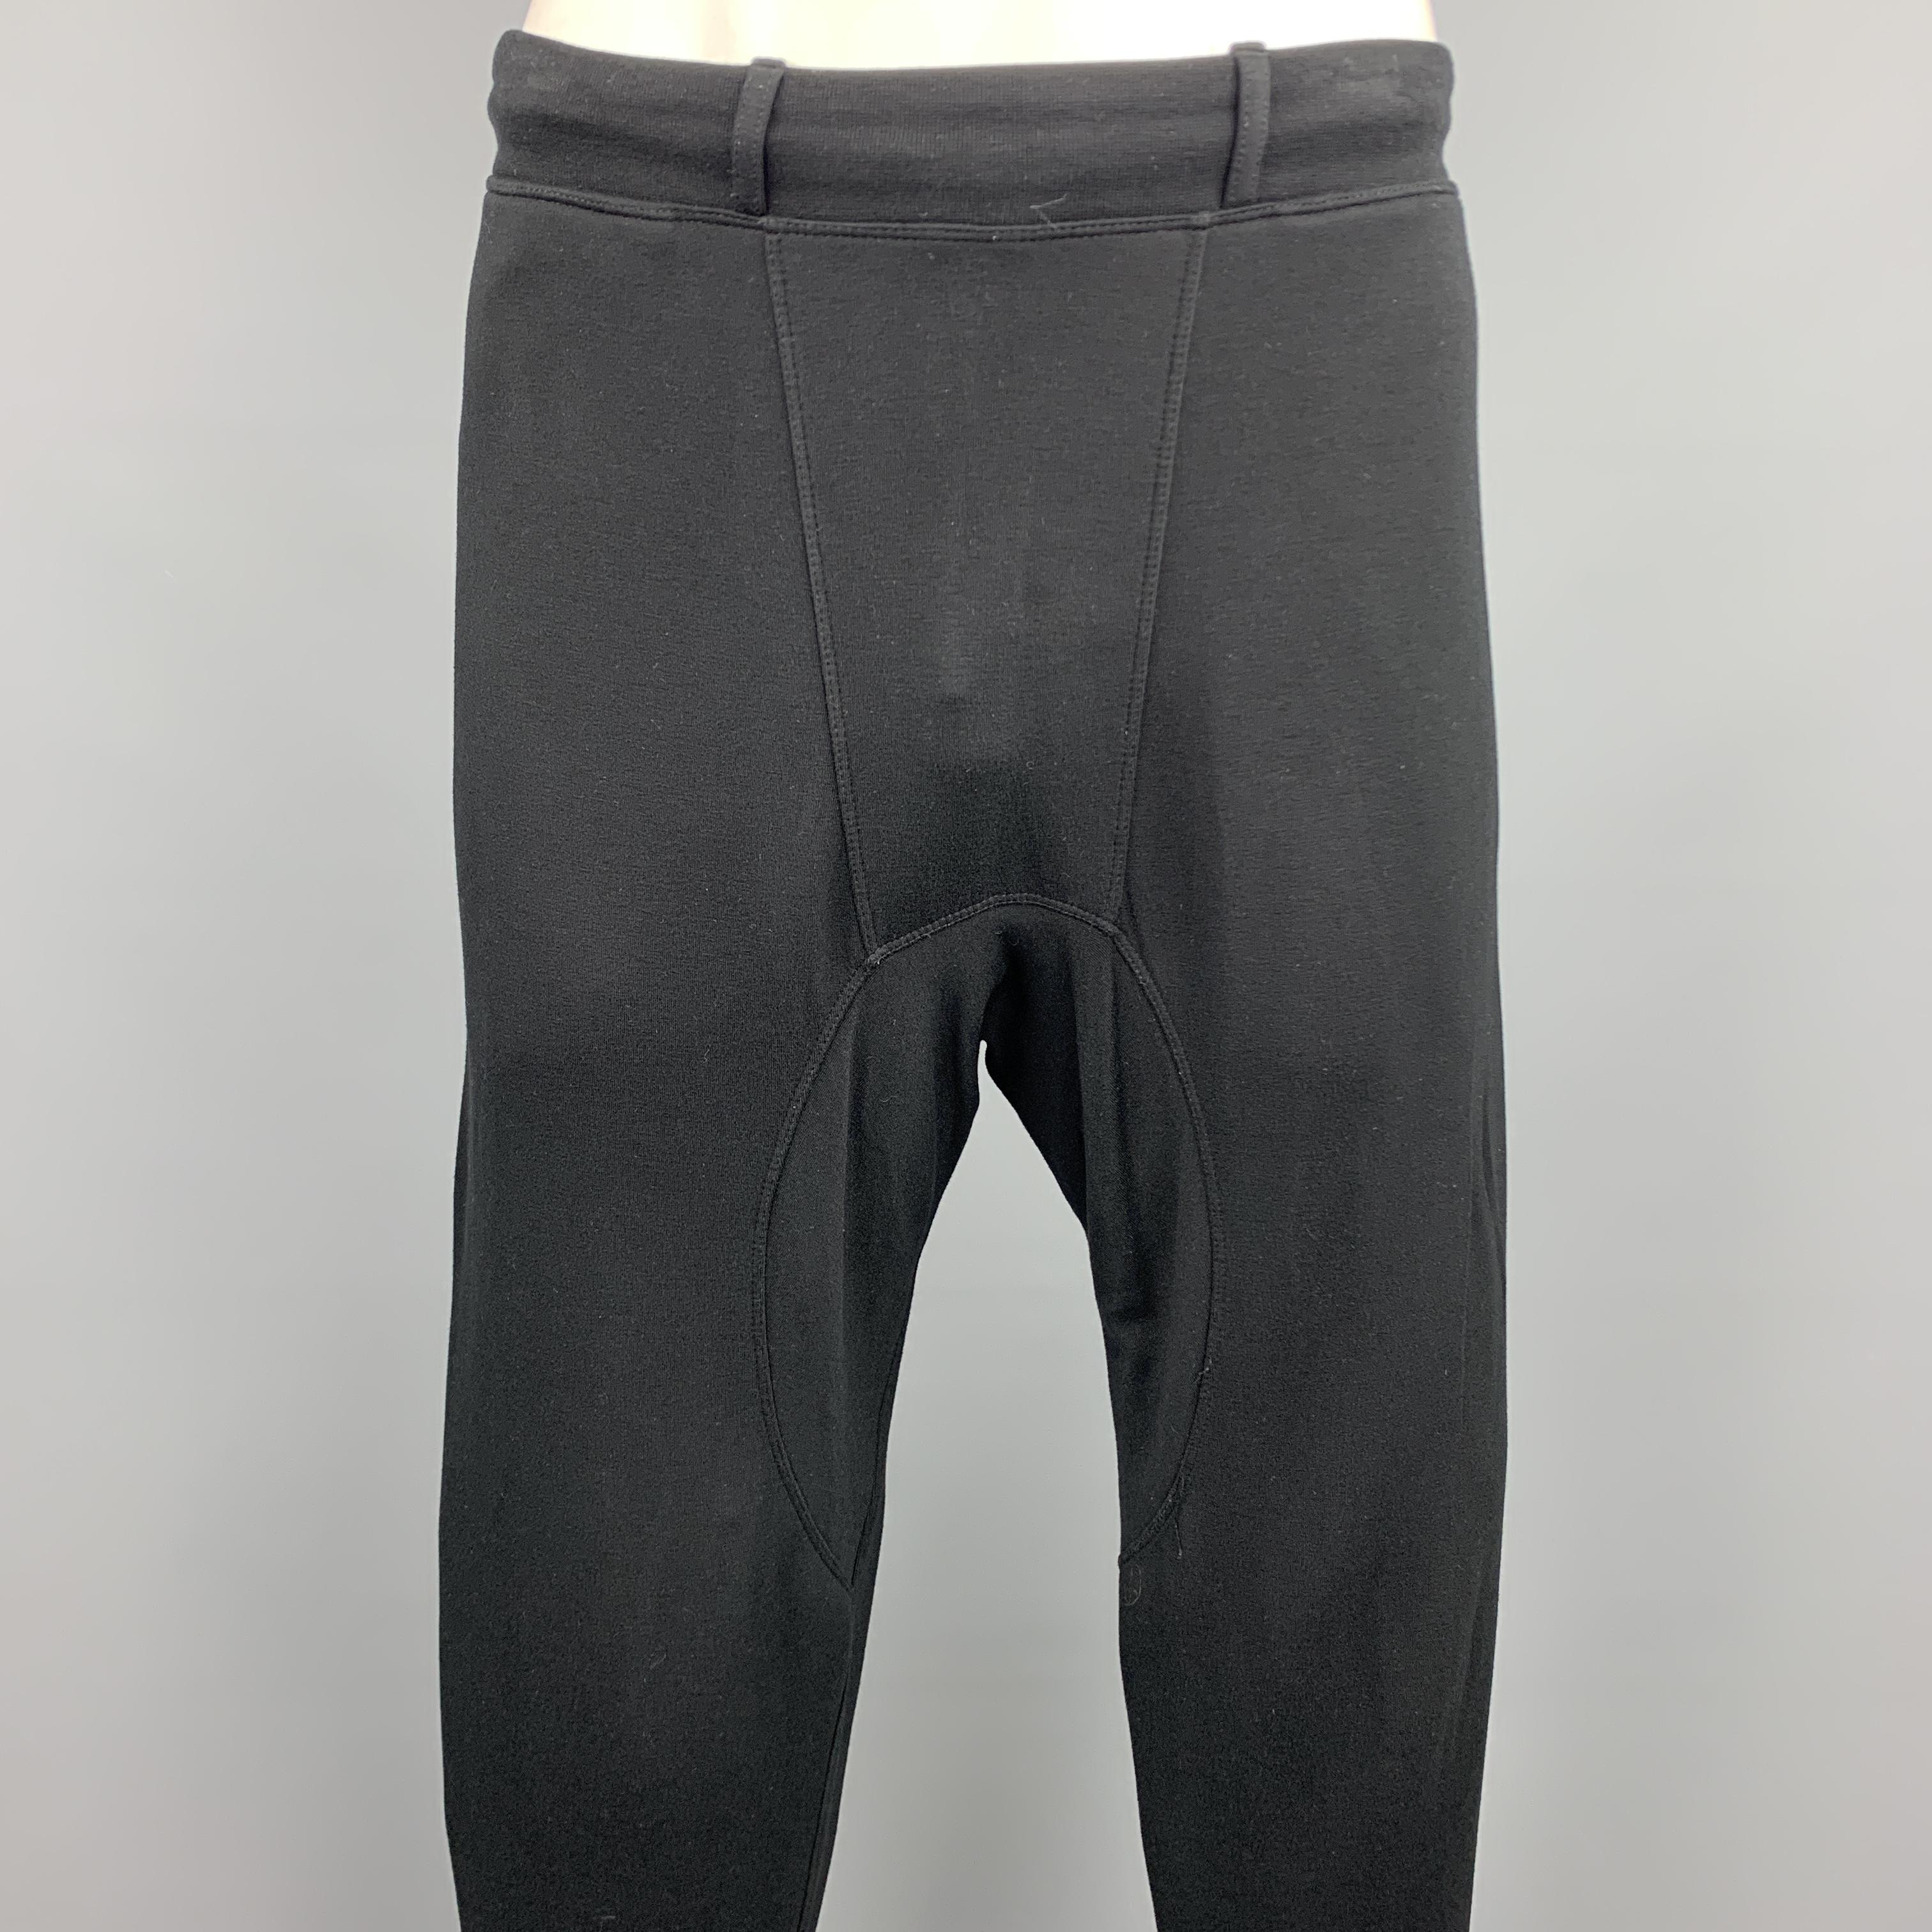 NEIL BARRETT casual pants comes in a black viscose / elastane featuring a drop-crotch style, elastic cuffs, and a drawstring closure. Made in Portugal.

Excellent Pre-Owned Condition.
Marked: L

Measurements:

Waist: 38 in. 
Rise: 9.5 in. 
Inseam: